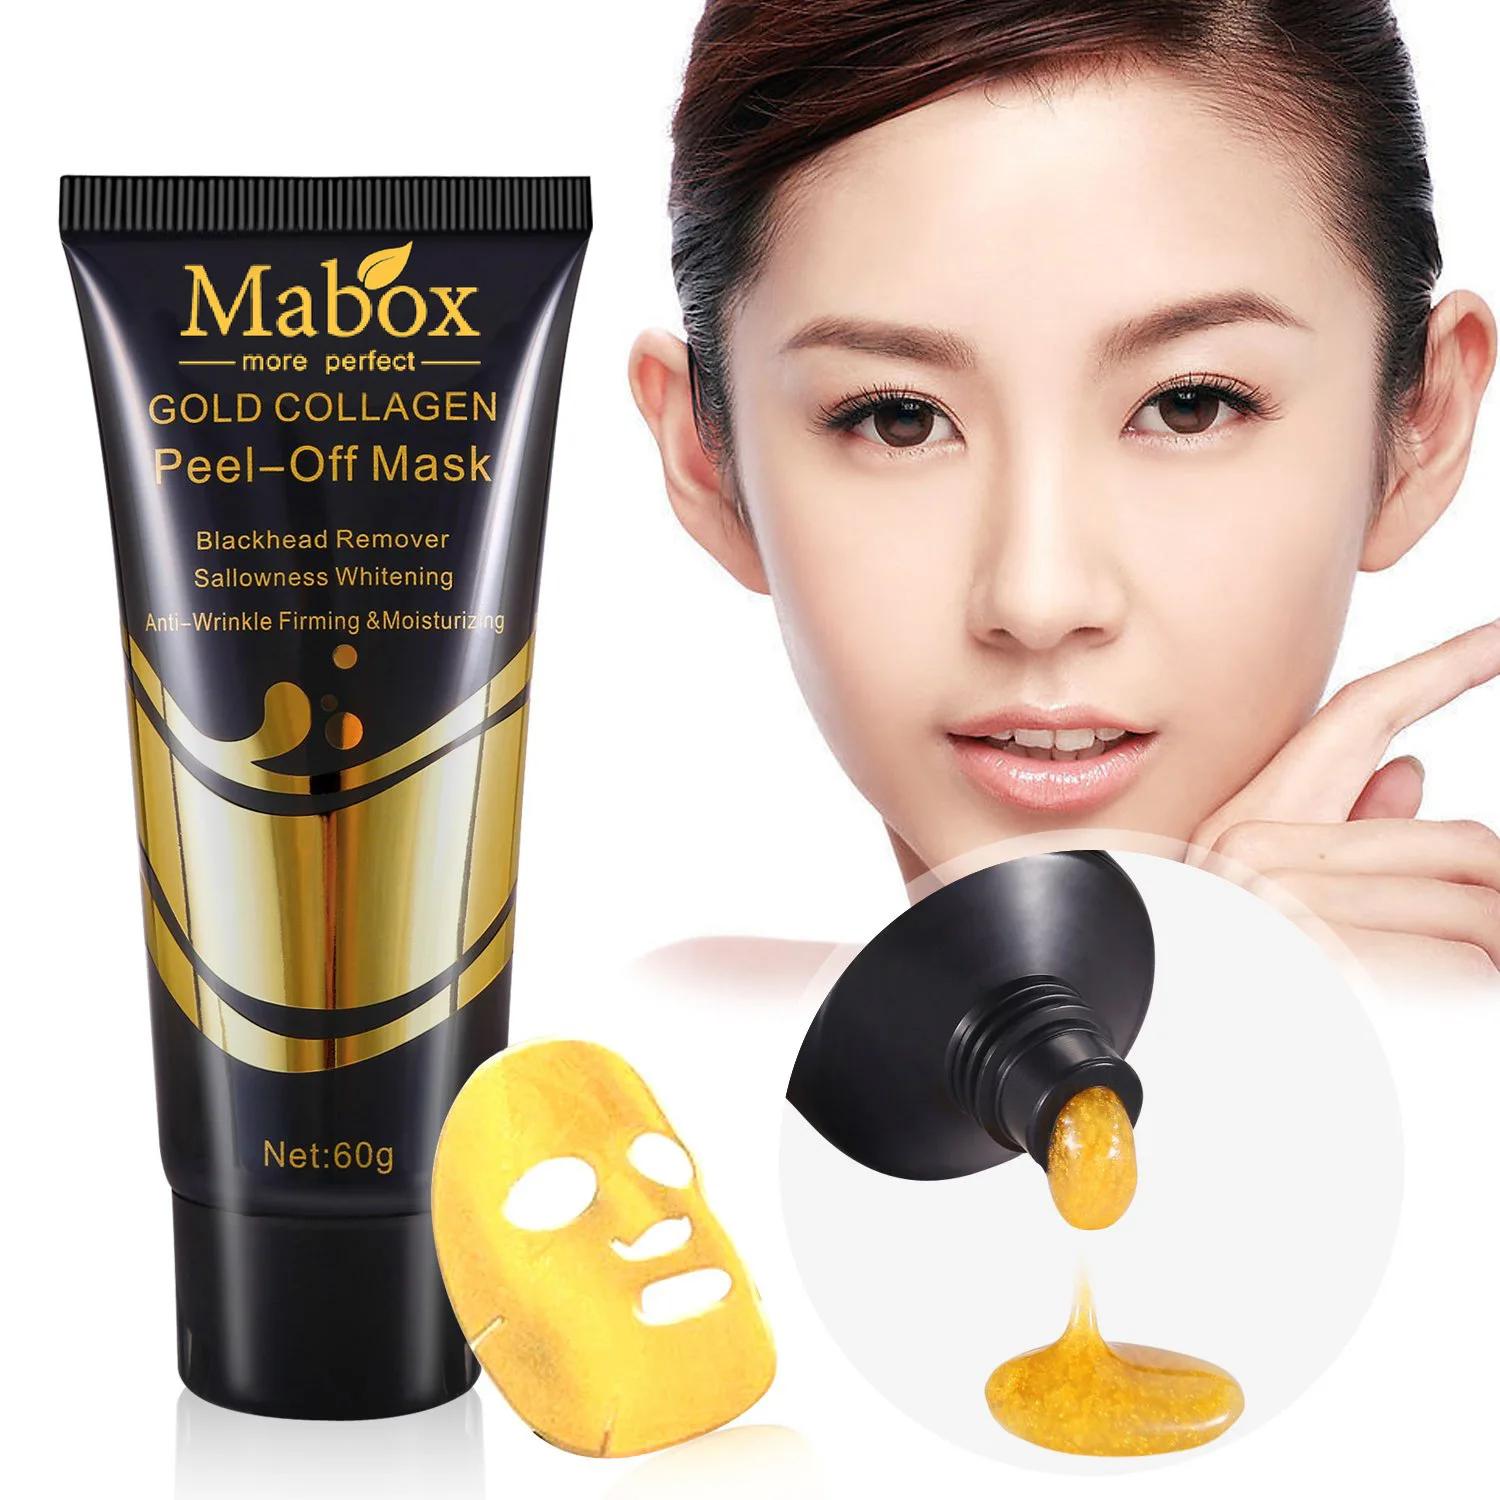 

24k Gold Collagen Against Black Dots Facial Mask Blackhead Remover Peel Off Mask Skin Care Product Deep Cleansing Peeling Mask